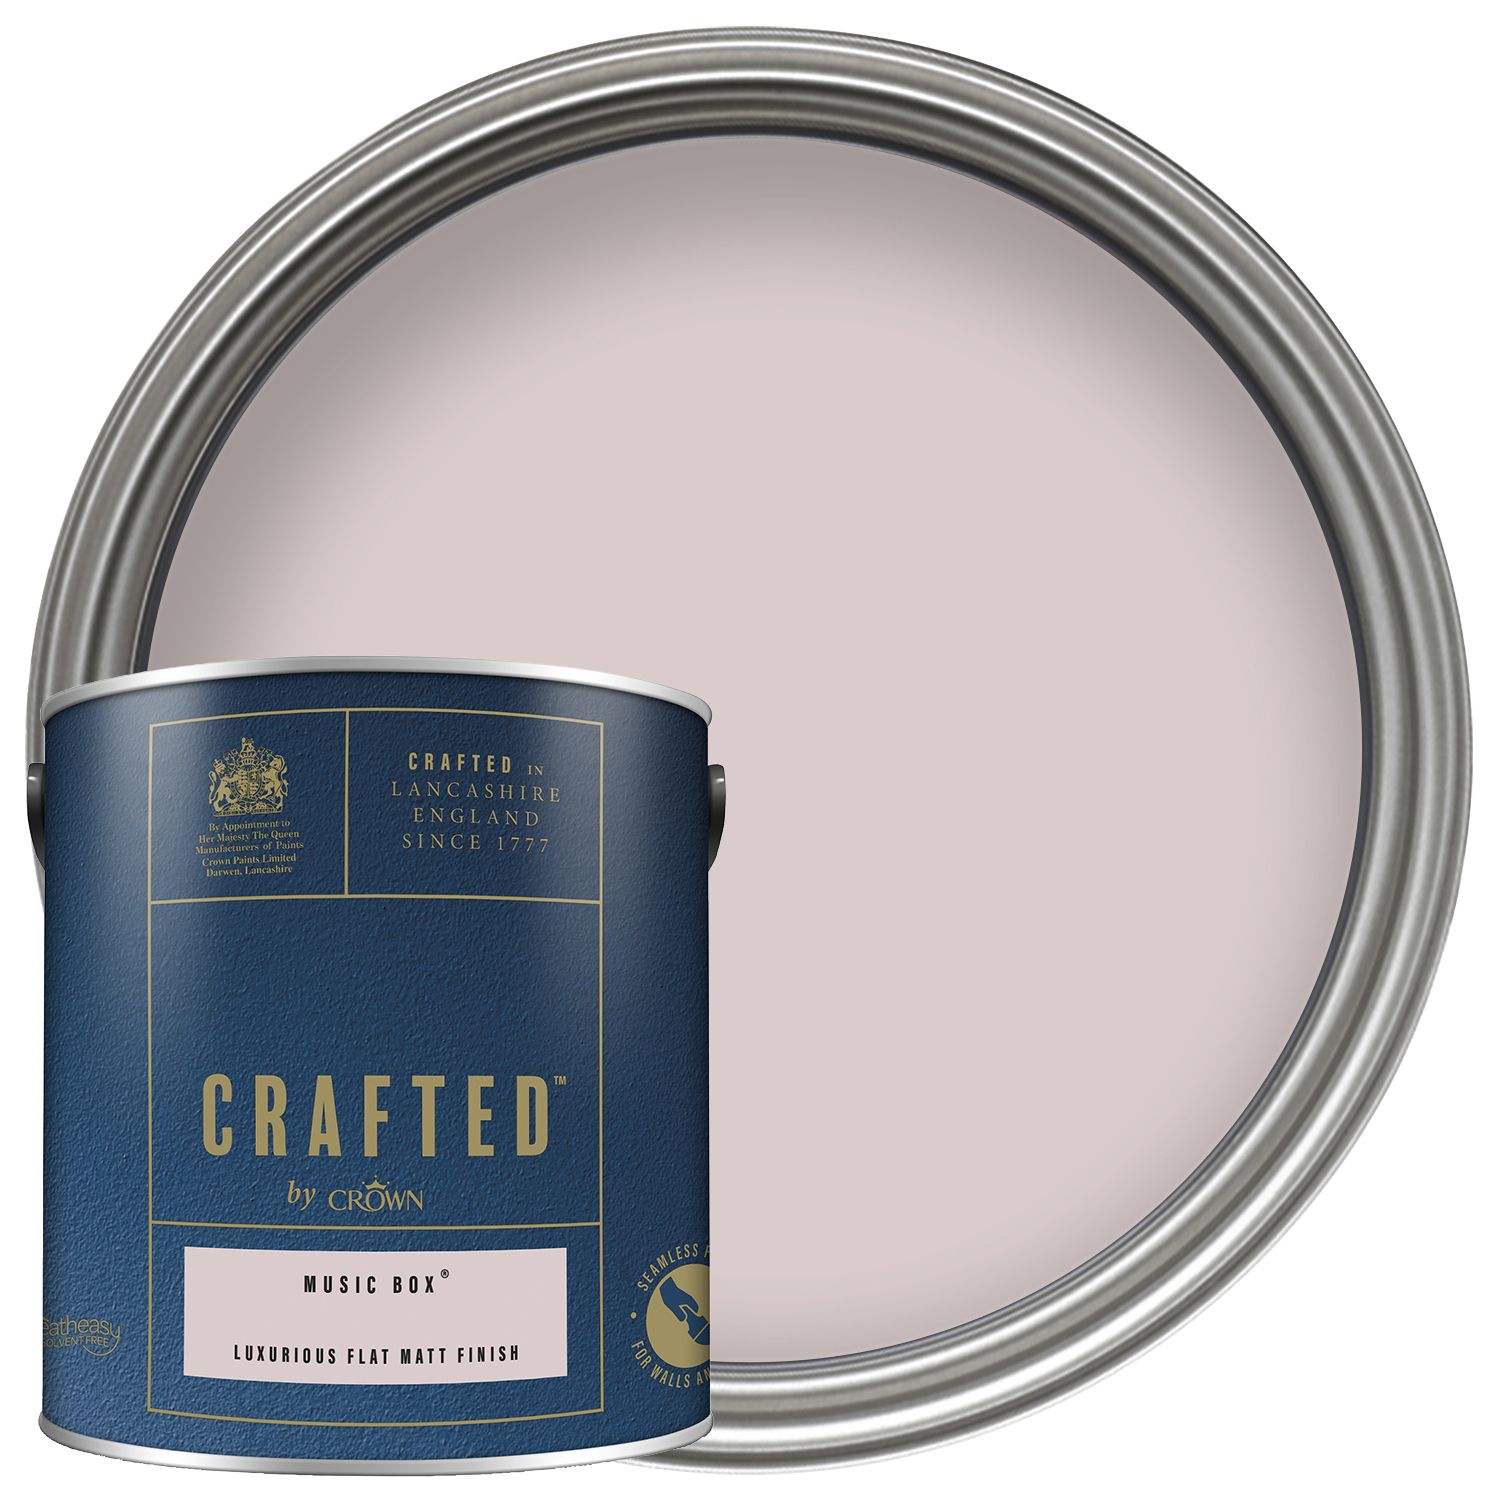 Image of CRAFTED™ by Crown Flat Matt Emulsion Interior Paint - Music Box™ - 2.5L